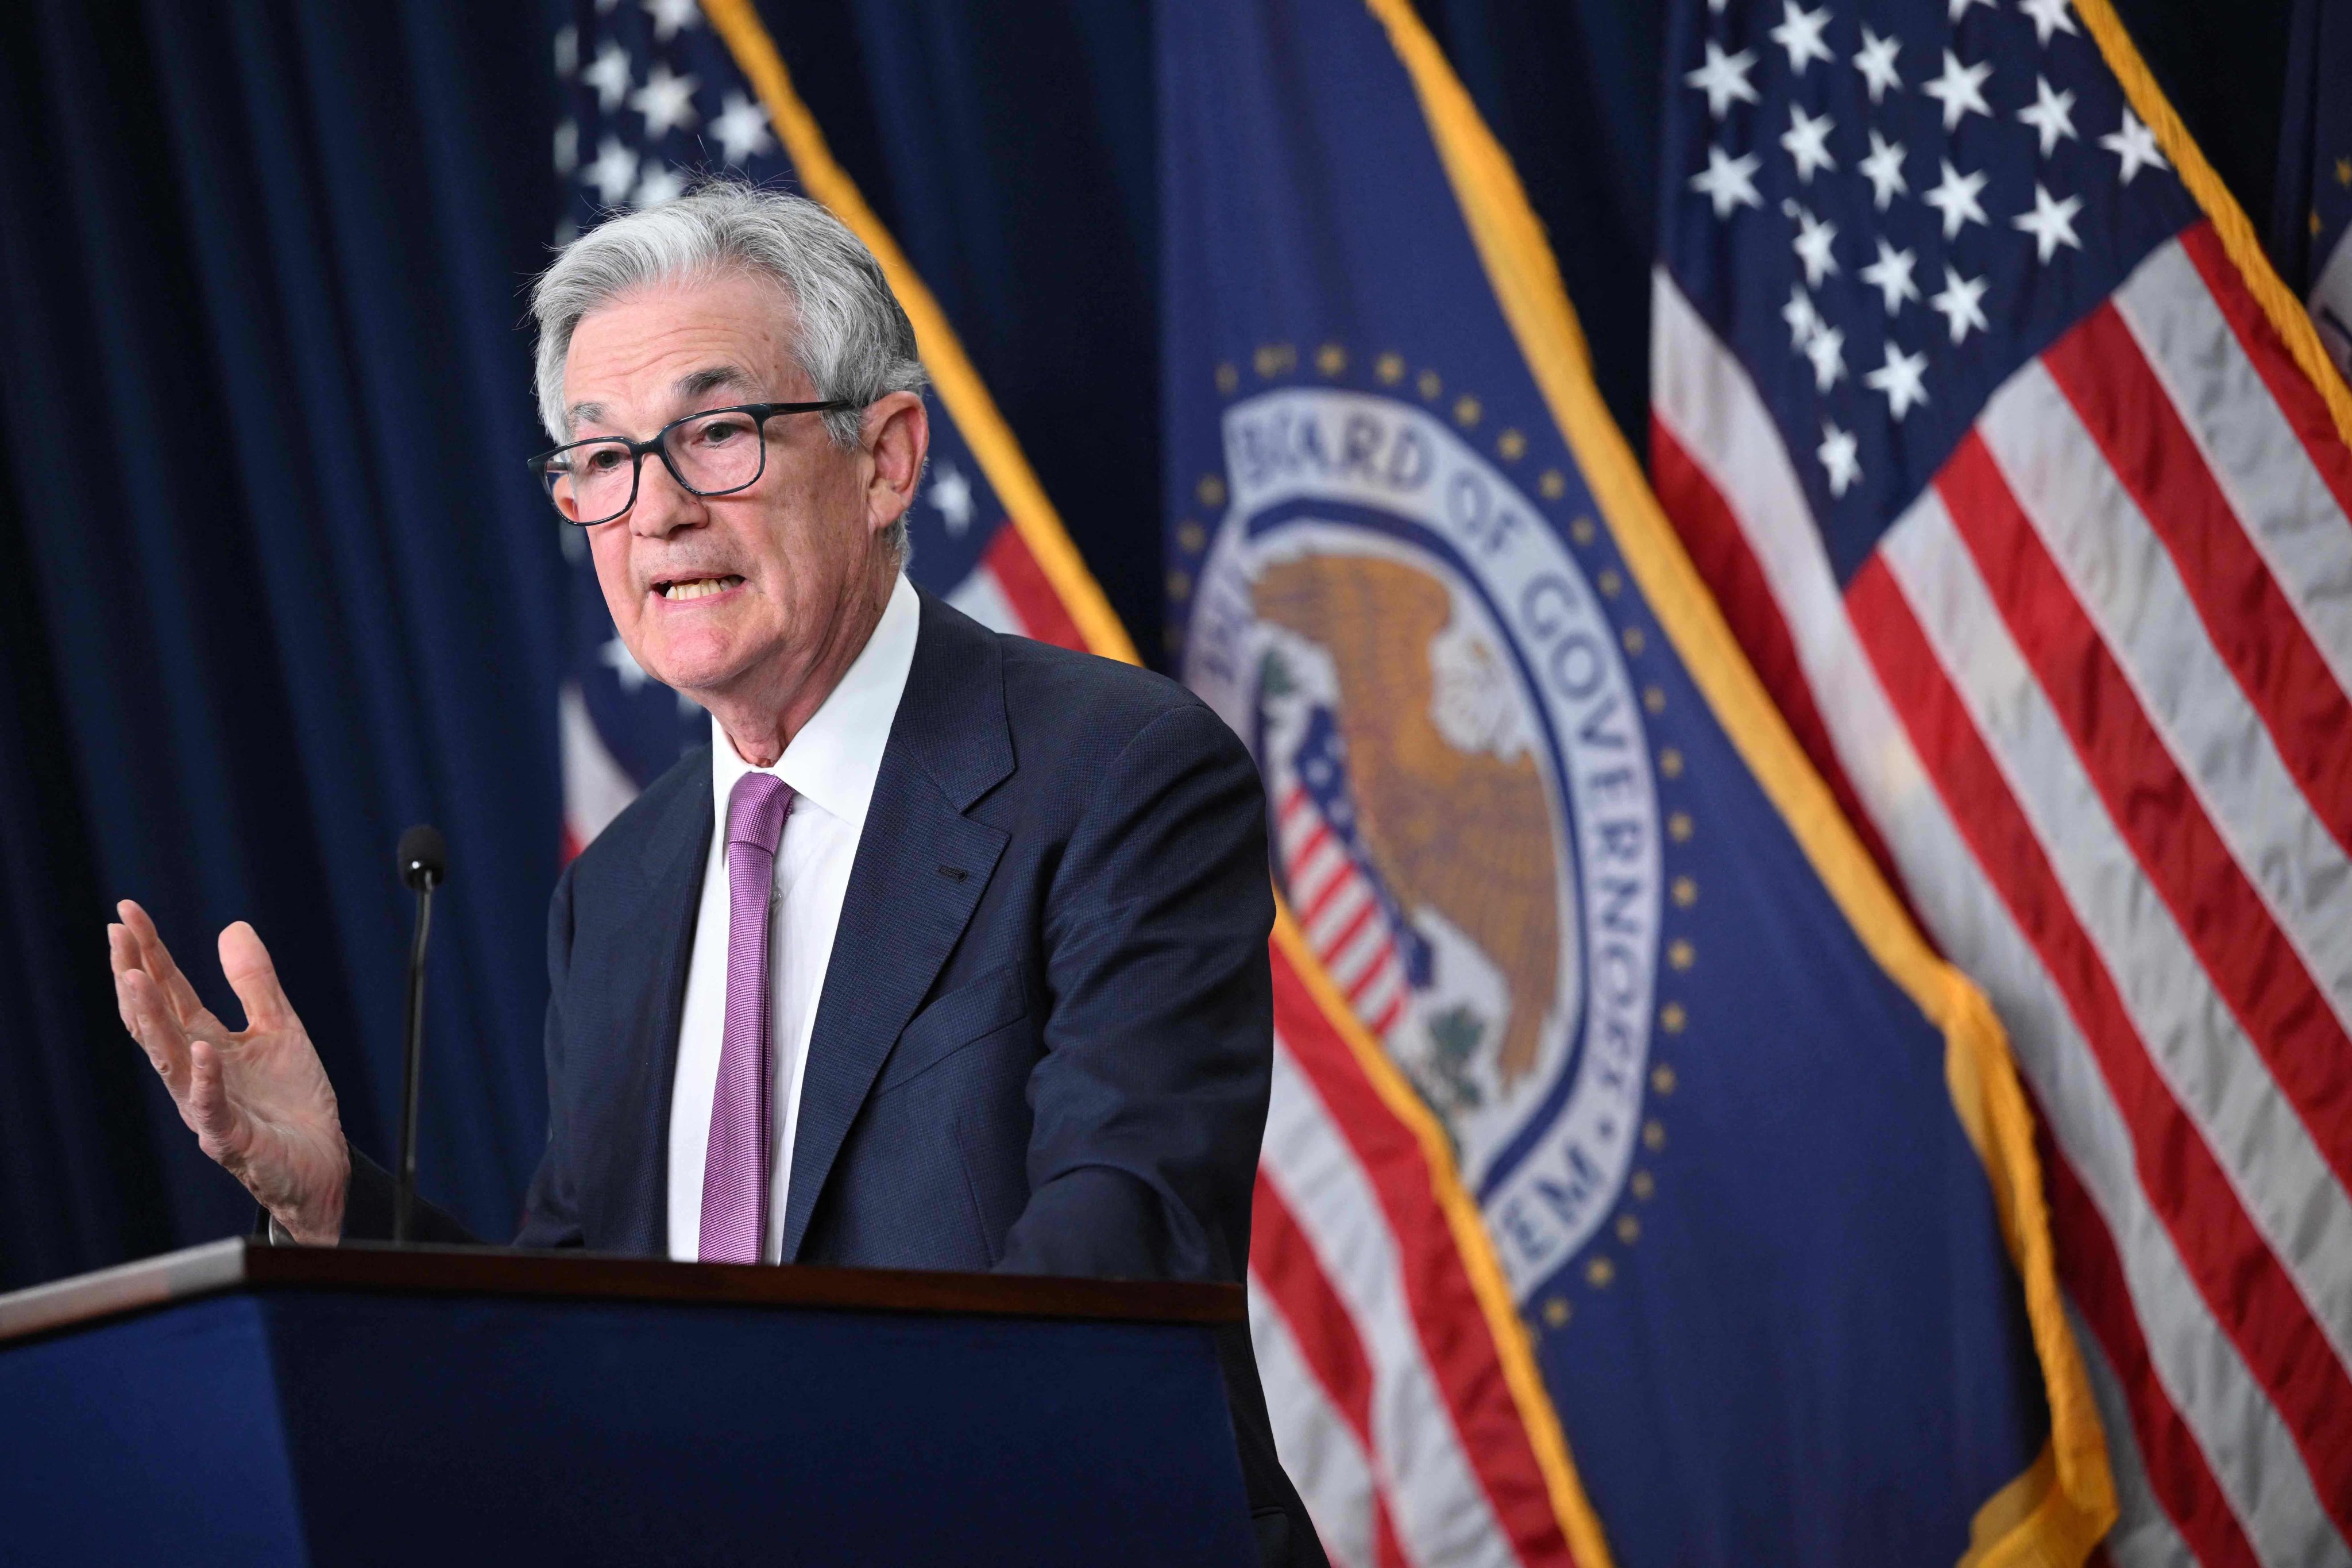 Federal Reserve Board chairman Jerome Powell speaks at a news conference in Washington on June 14. The Fed paused its aggressive campaign of interest rate increases despite “elevated” inflation, while indicating a sharp rise could be needed before the end of the year. Photo: AFP